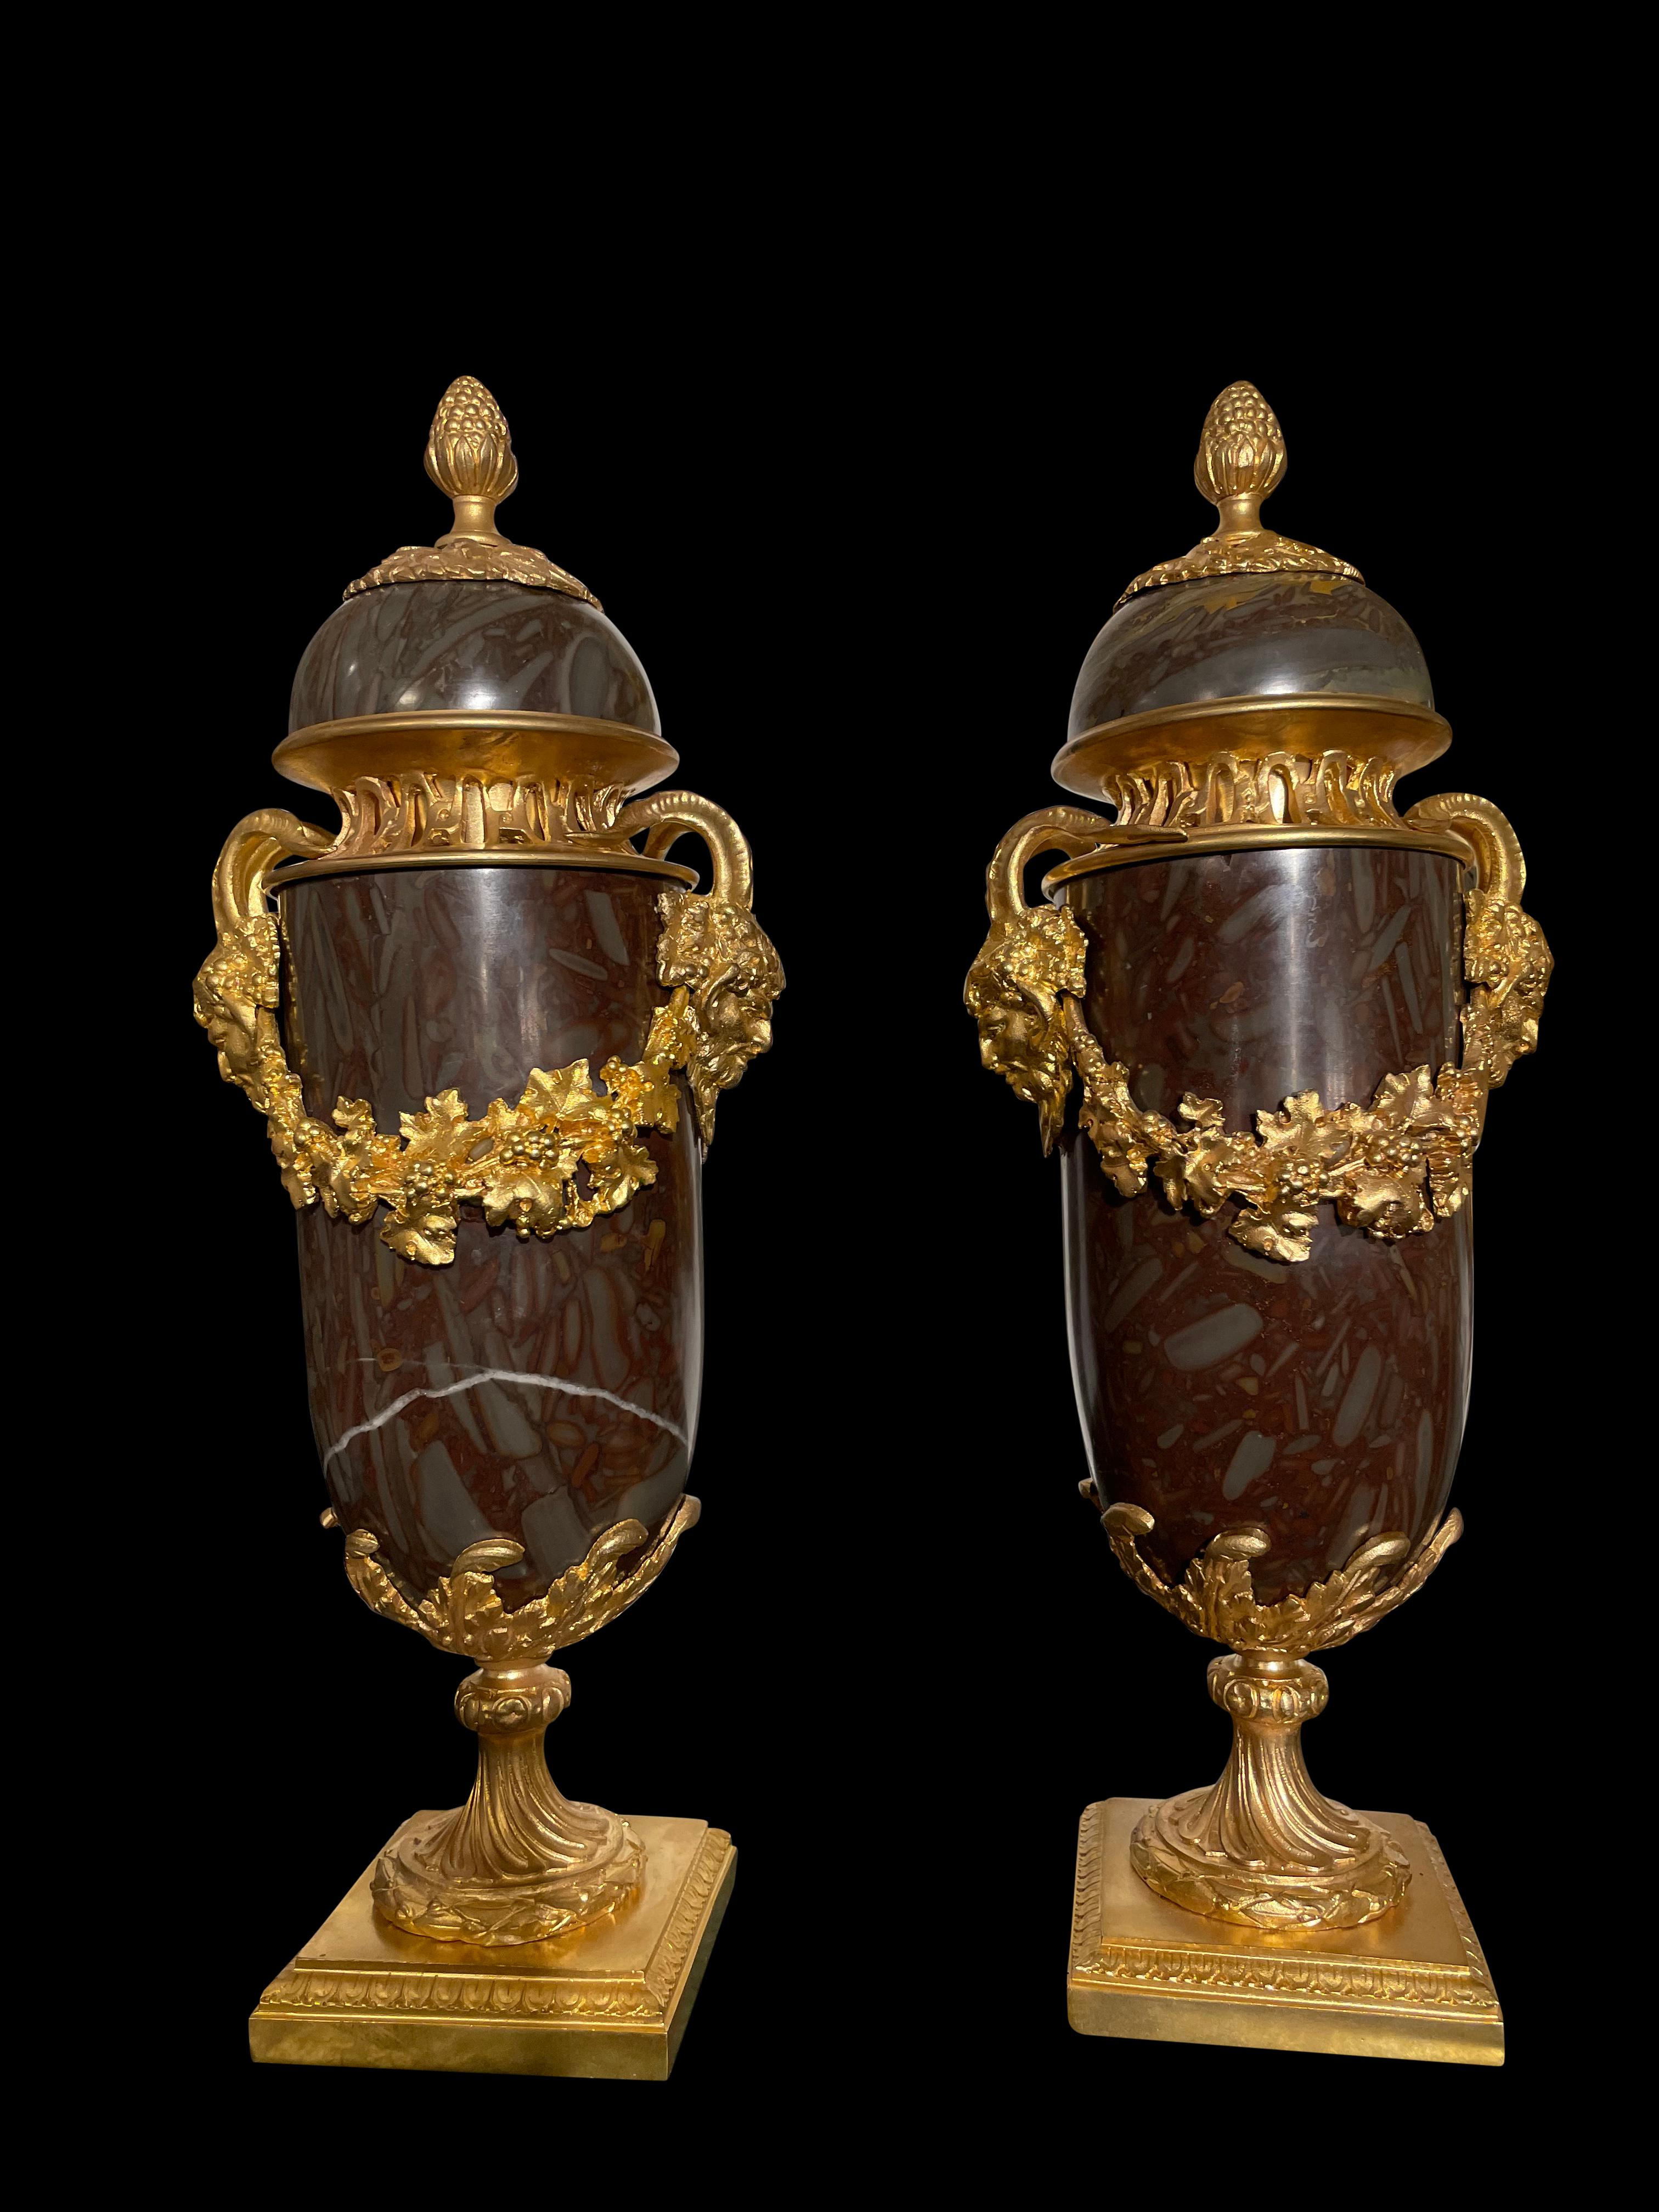 A remarkable pair of French 20th century Louis XVI style onyx and ormolu lidded urns. Each urn is raised by a square ormolu base with concave corners and a delicate Coeur de Rai wraparound band. The socle shaped pedestals display fine wraparound